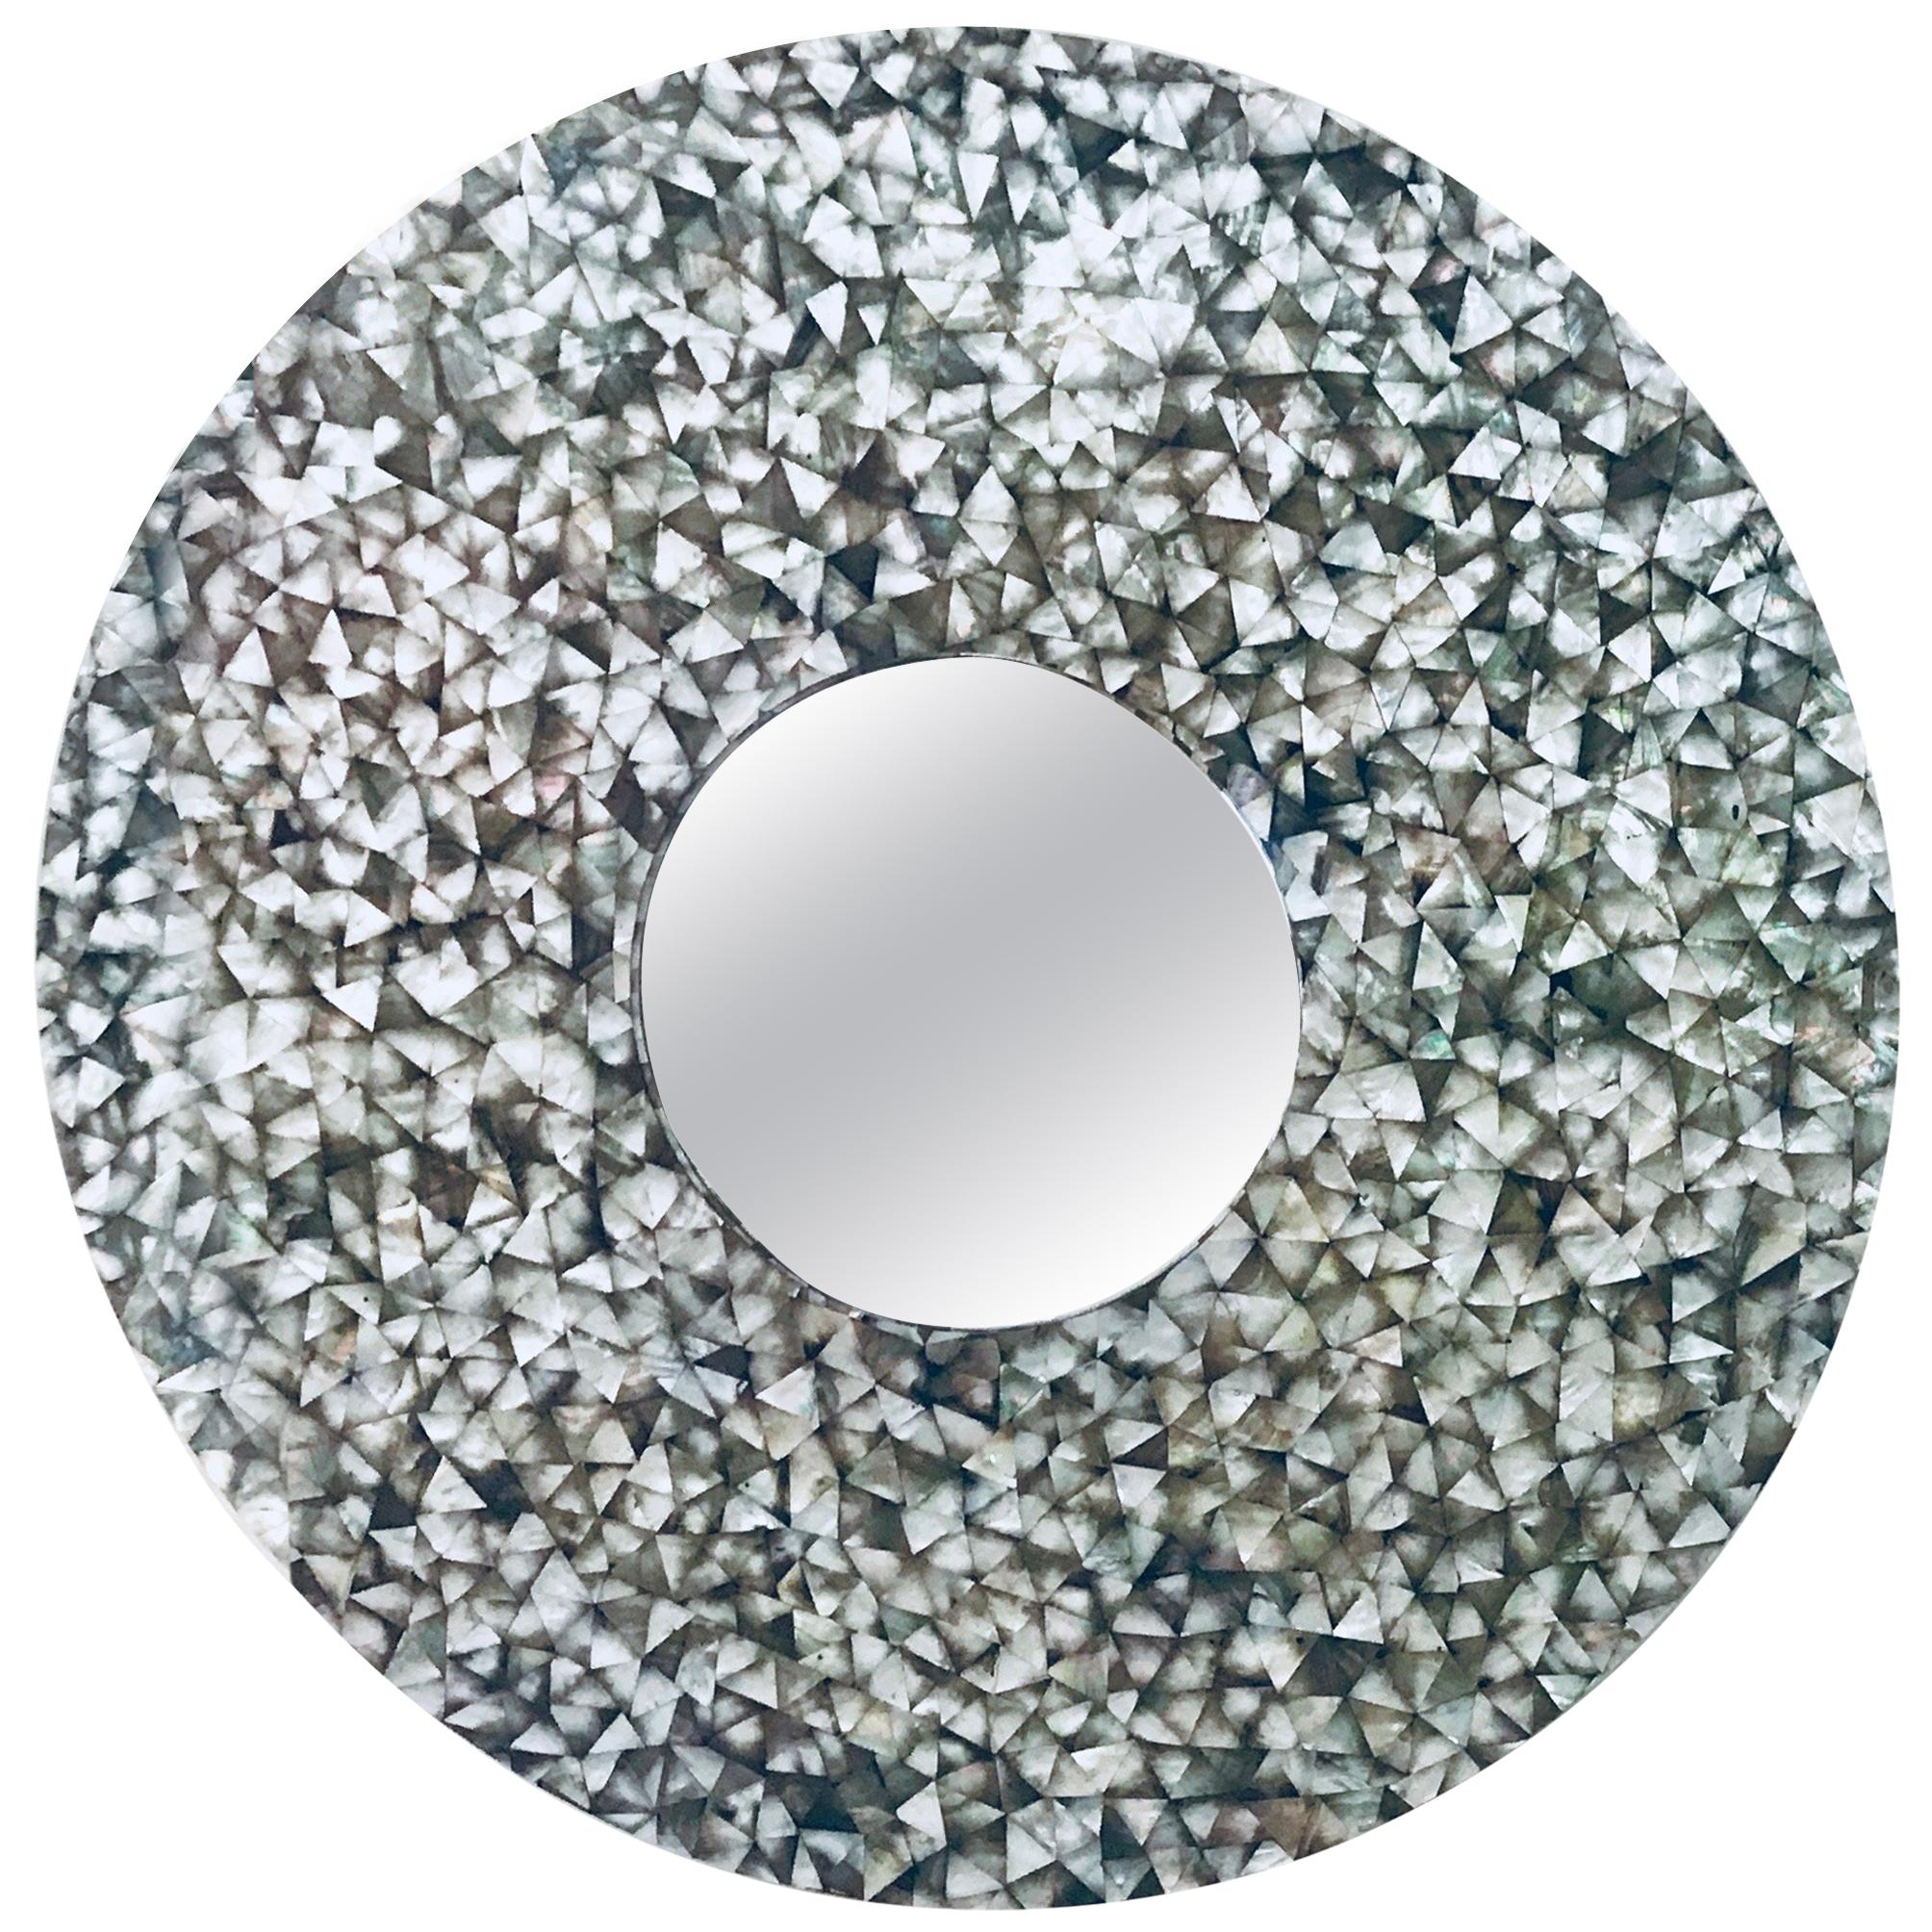 'Crystal Sea' Large Convex Round Mirror with Black Mother of Pearl Frame For Sale